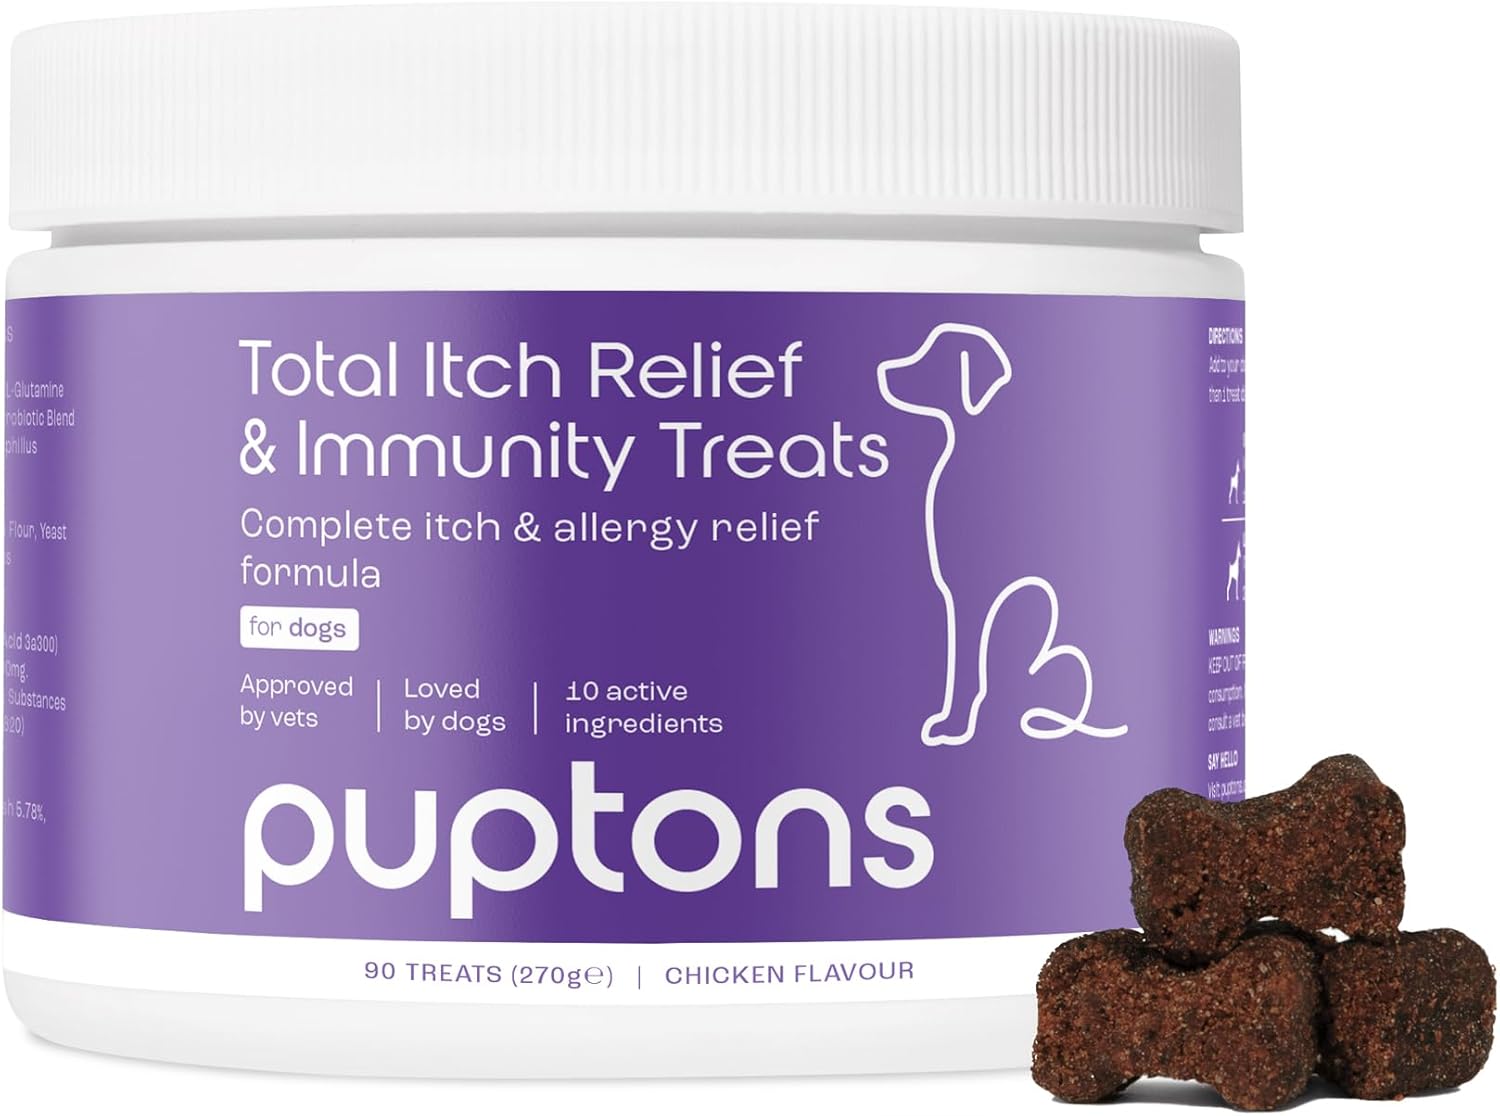 puptons Total Itch Relief & Immunity Treats for Dogs | Stop Itching, licking and scratching | Sooth itchy paws, skin, ears, eyes | For small, medium & large dogs (90 Treats)?TIRE-DOGS-TREA-CHIC